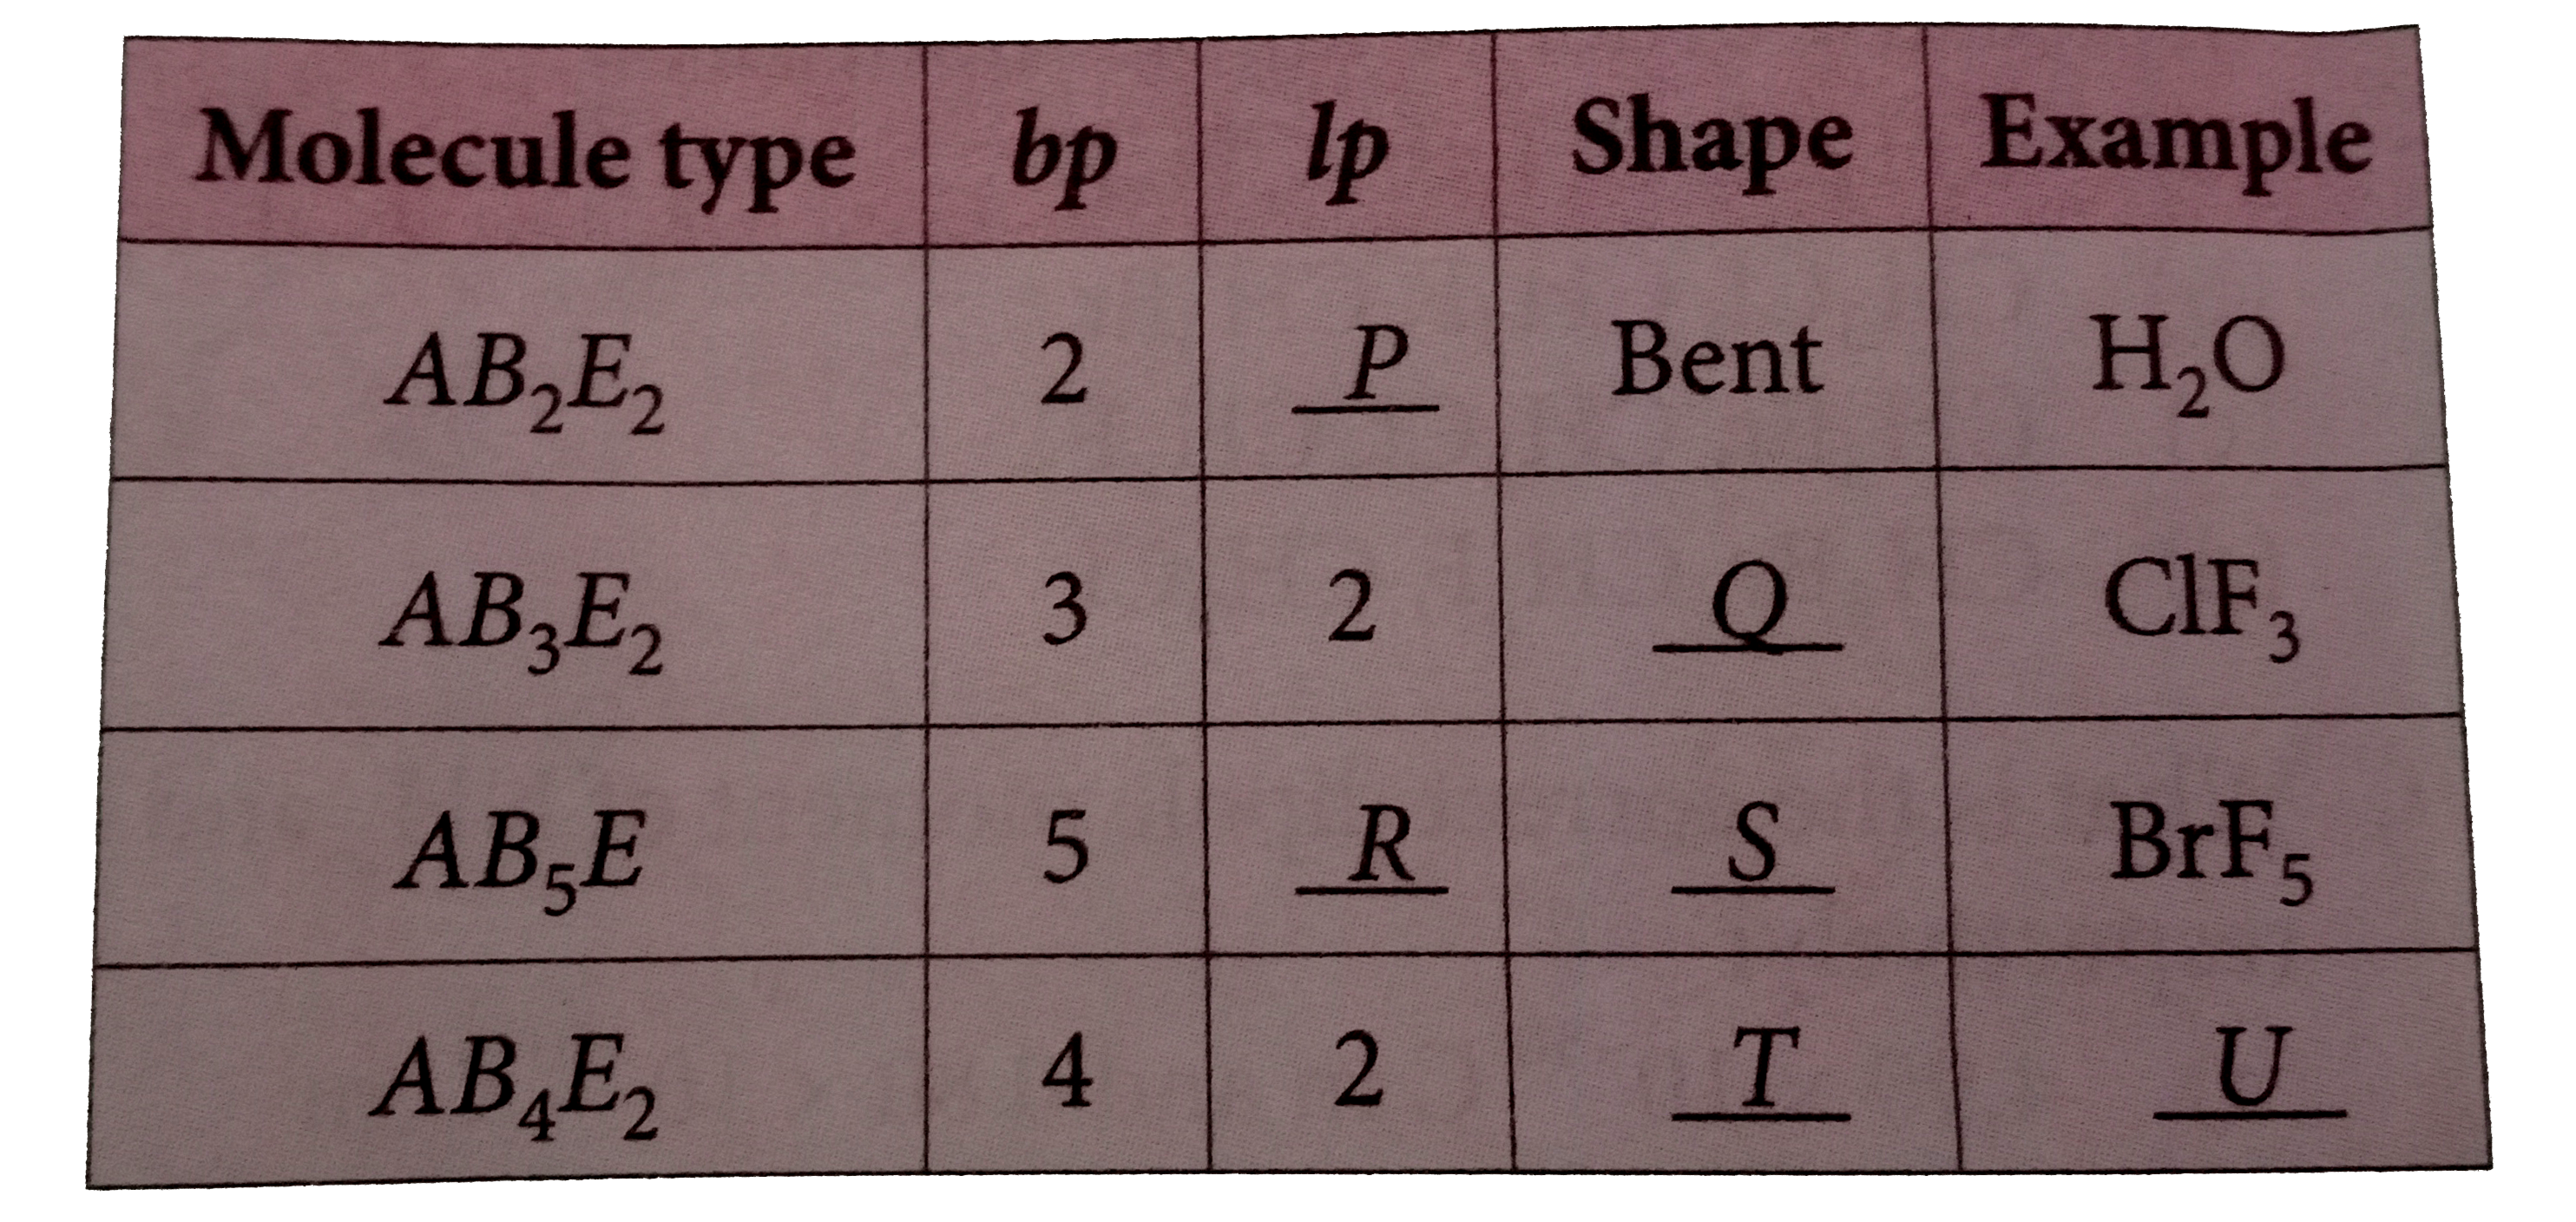 Given below is the table showing shapes of some molecules having lone pairs of electrons. Fill up the blanks left in it.